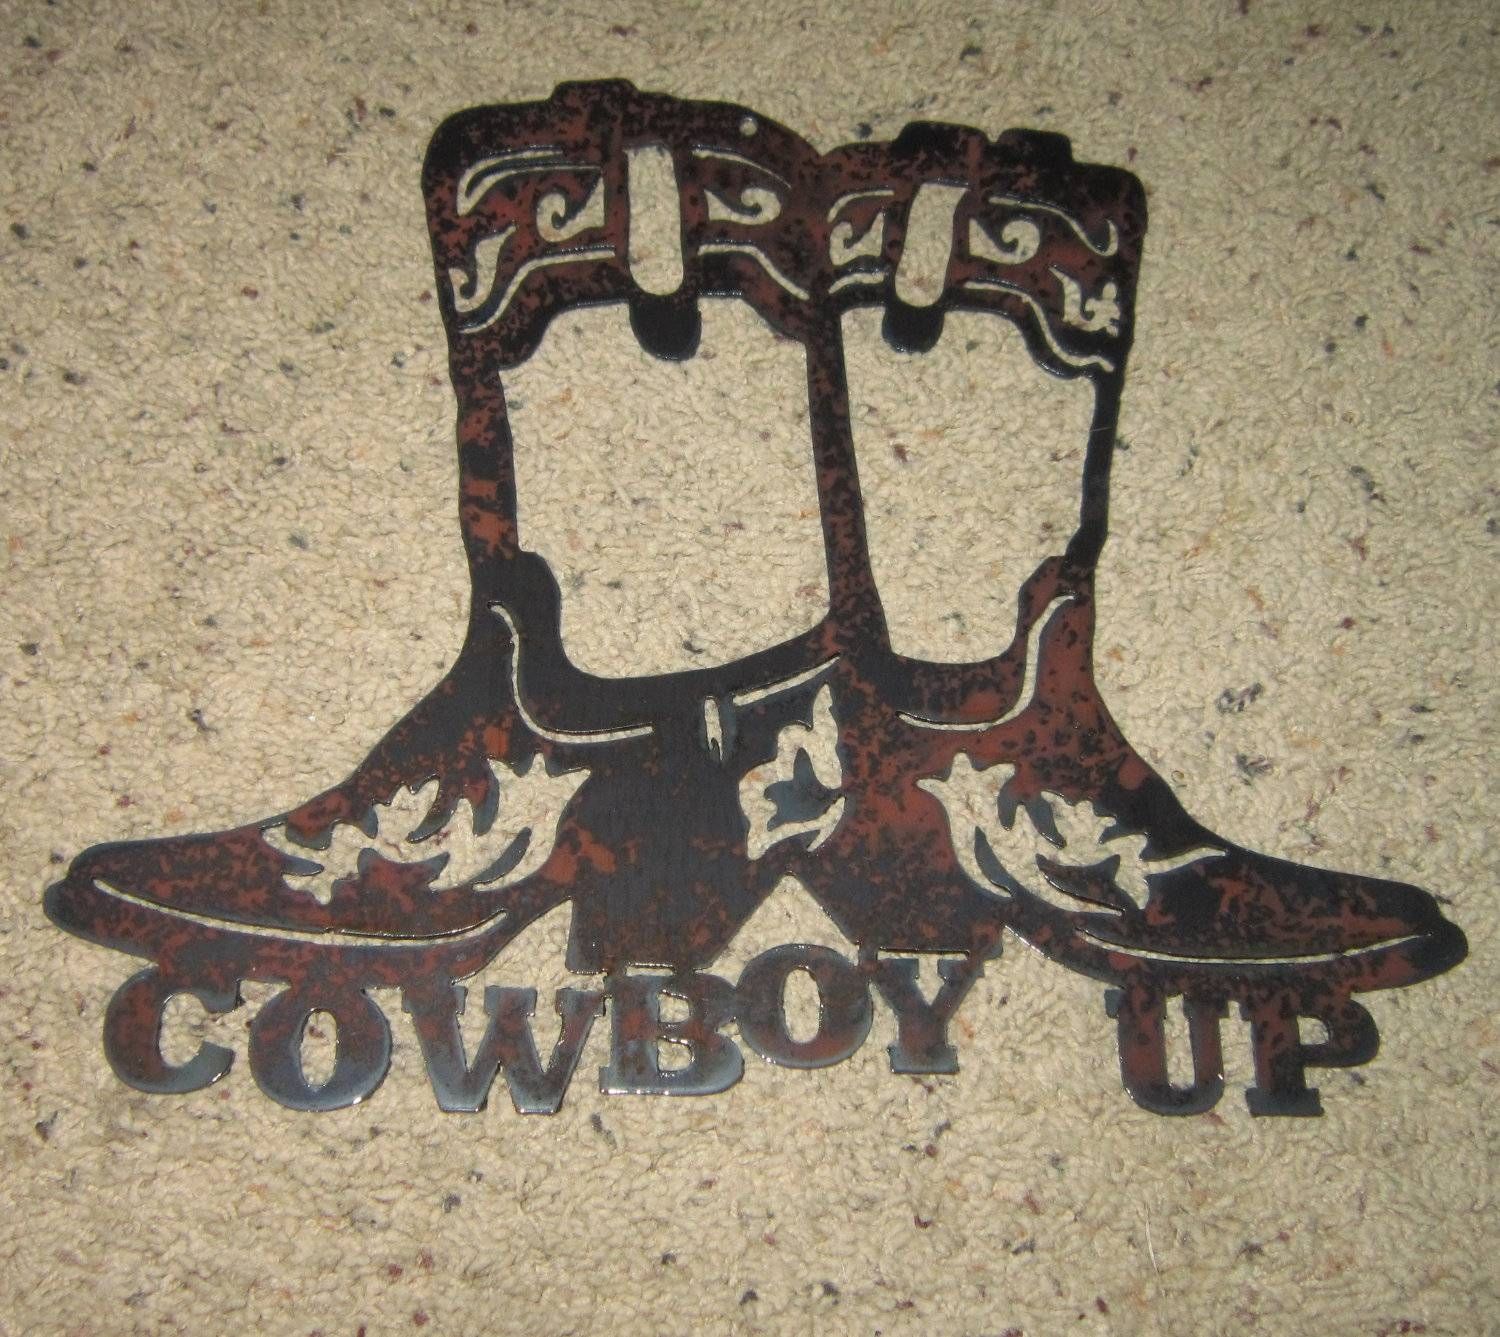 Cowboy Up Metal Art Cowboy Art Western Art Country Home Pertaining To Recent Country Metal Wall Art (View 2 of 30)